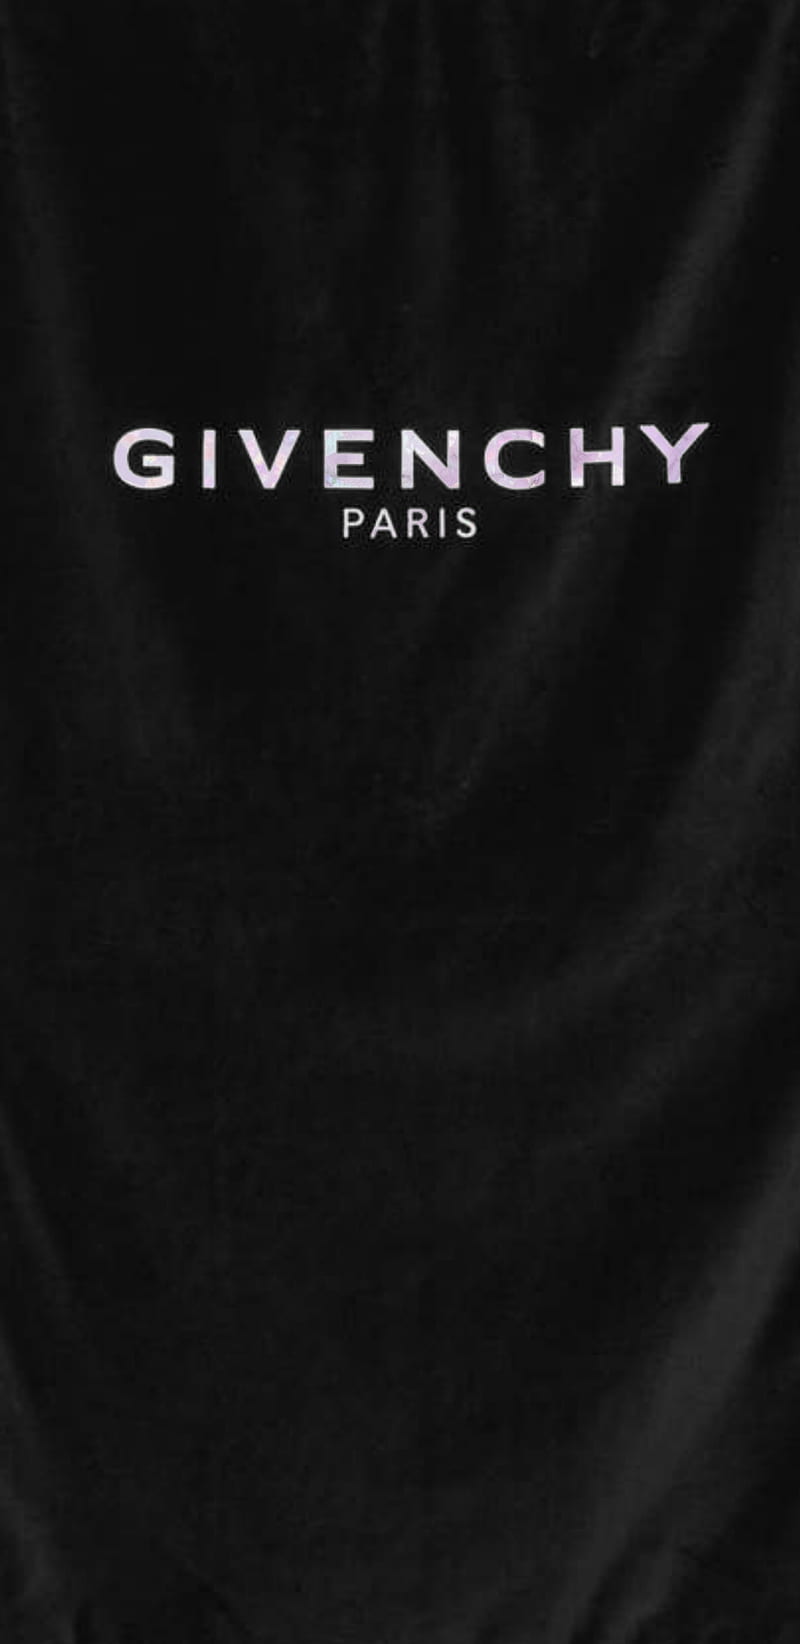 100+] Givenchy Background s | Wallpapers.com